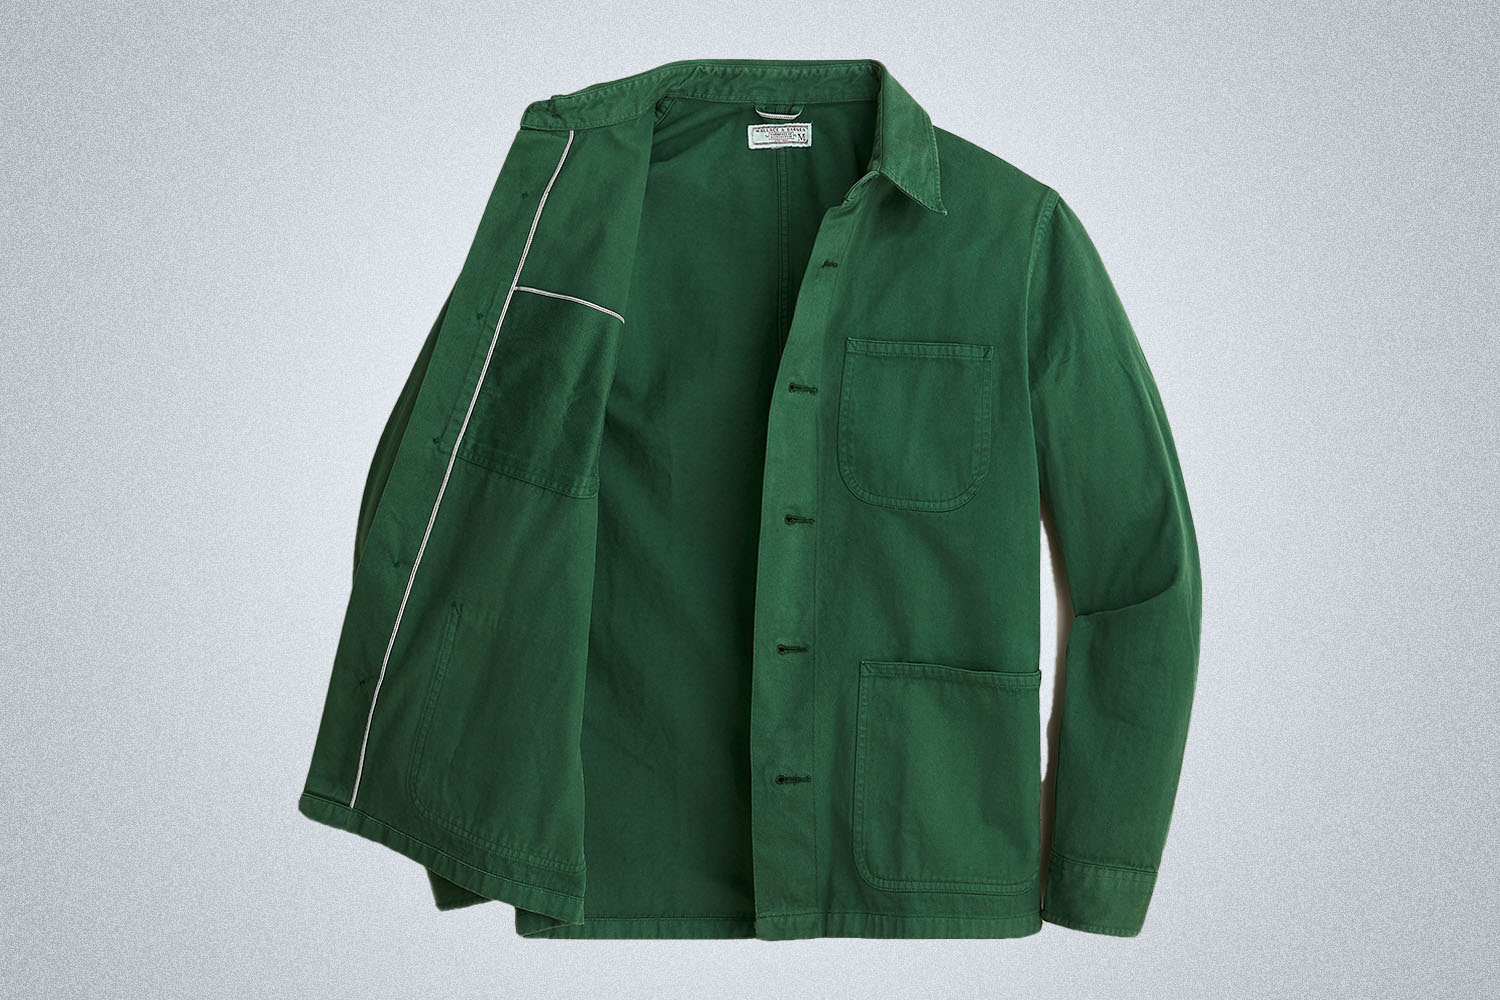 A green chore coat on a grey background